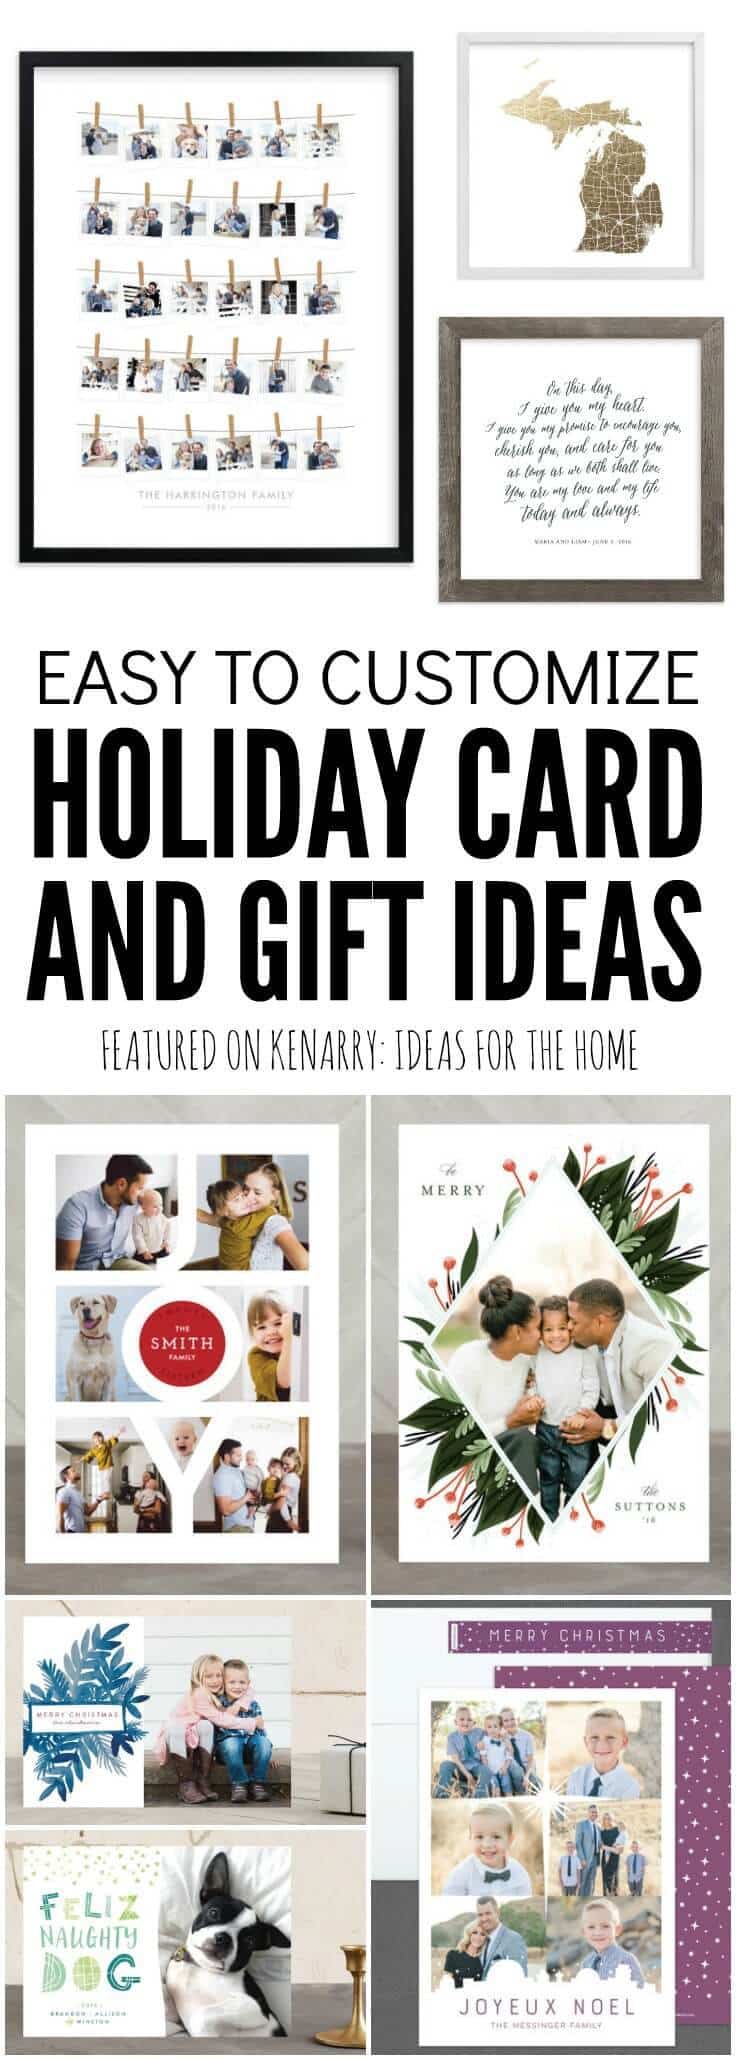 Love these unique ideas for easy to customize holiday cards and gifts from Minted! We'll be able to create something one-of-a-kind and special for everyone this Christmas.